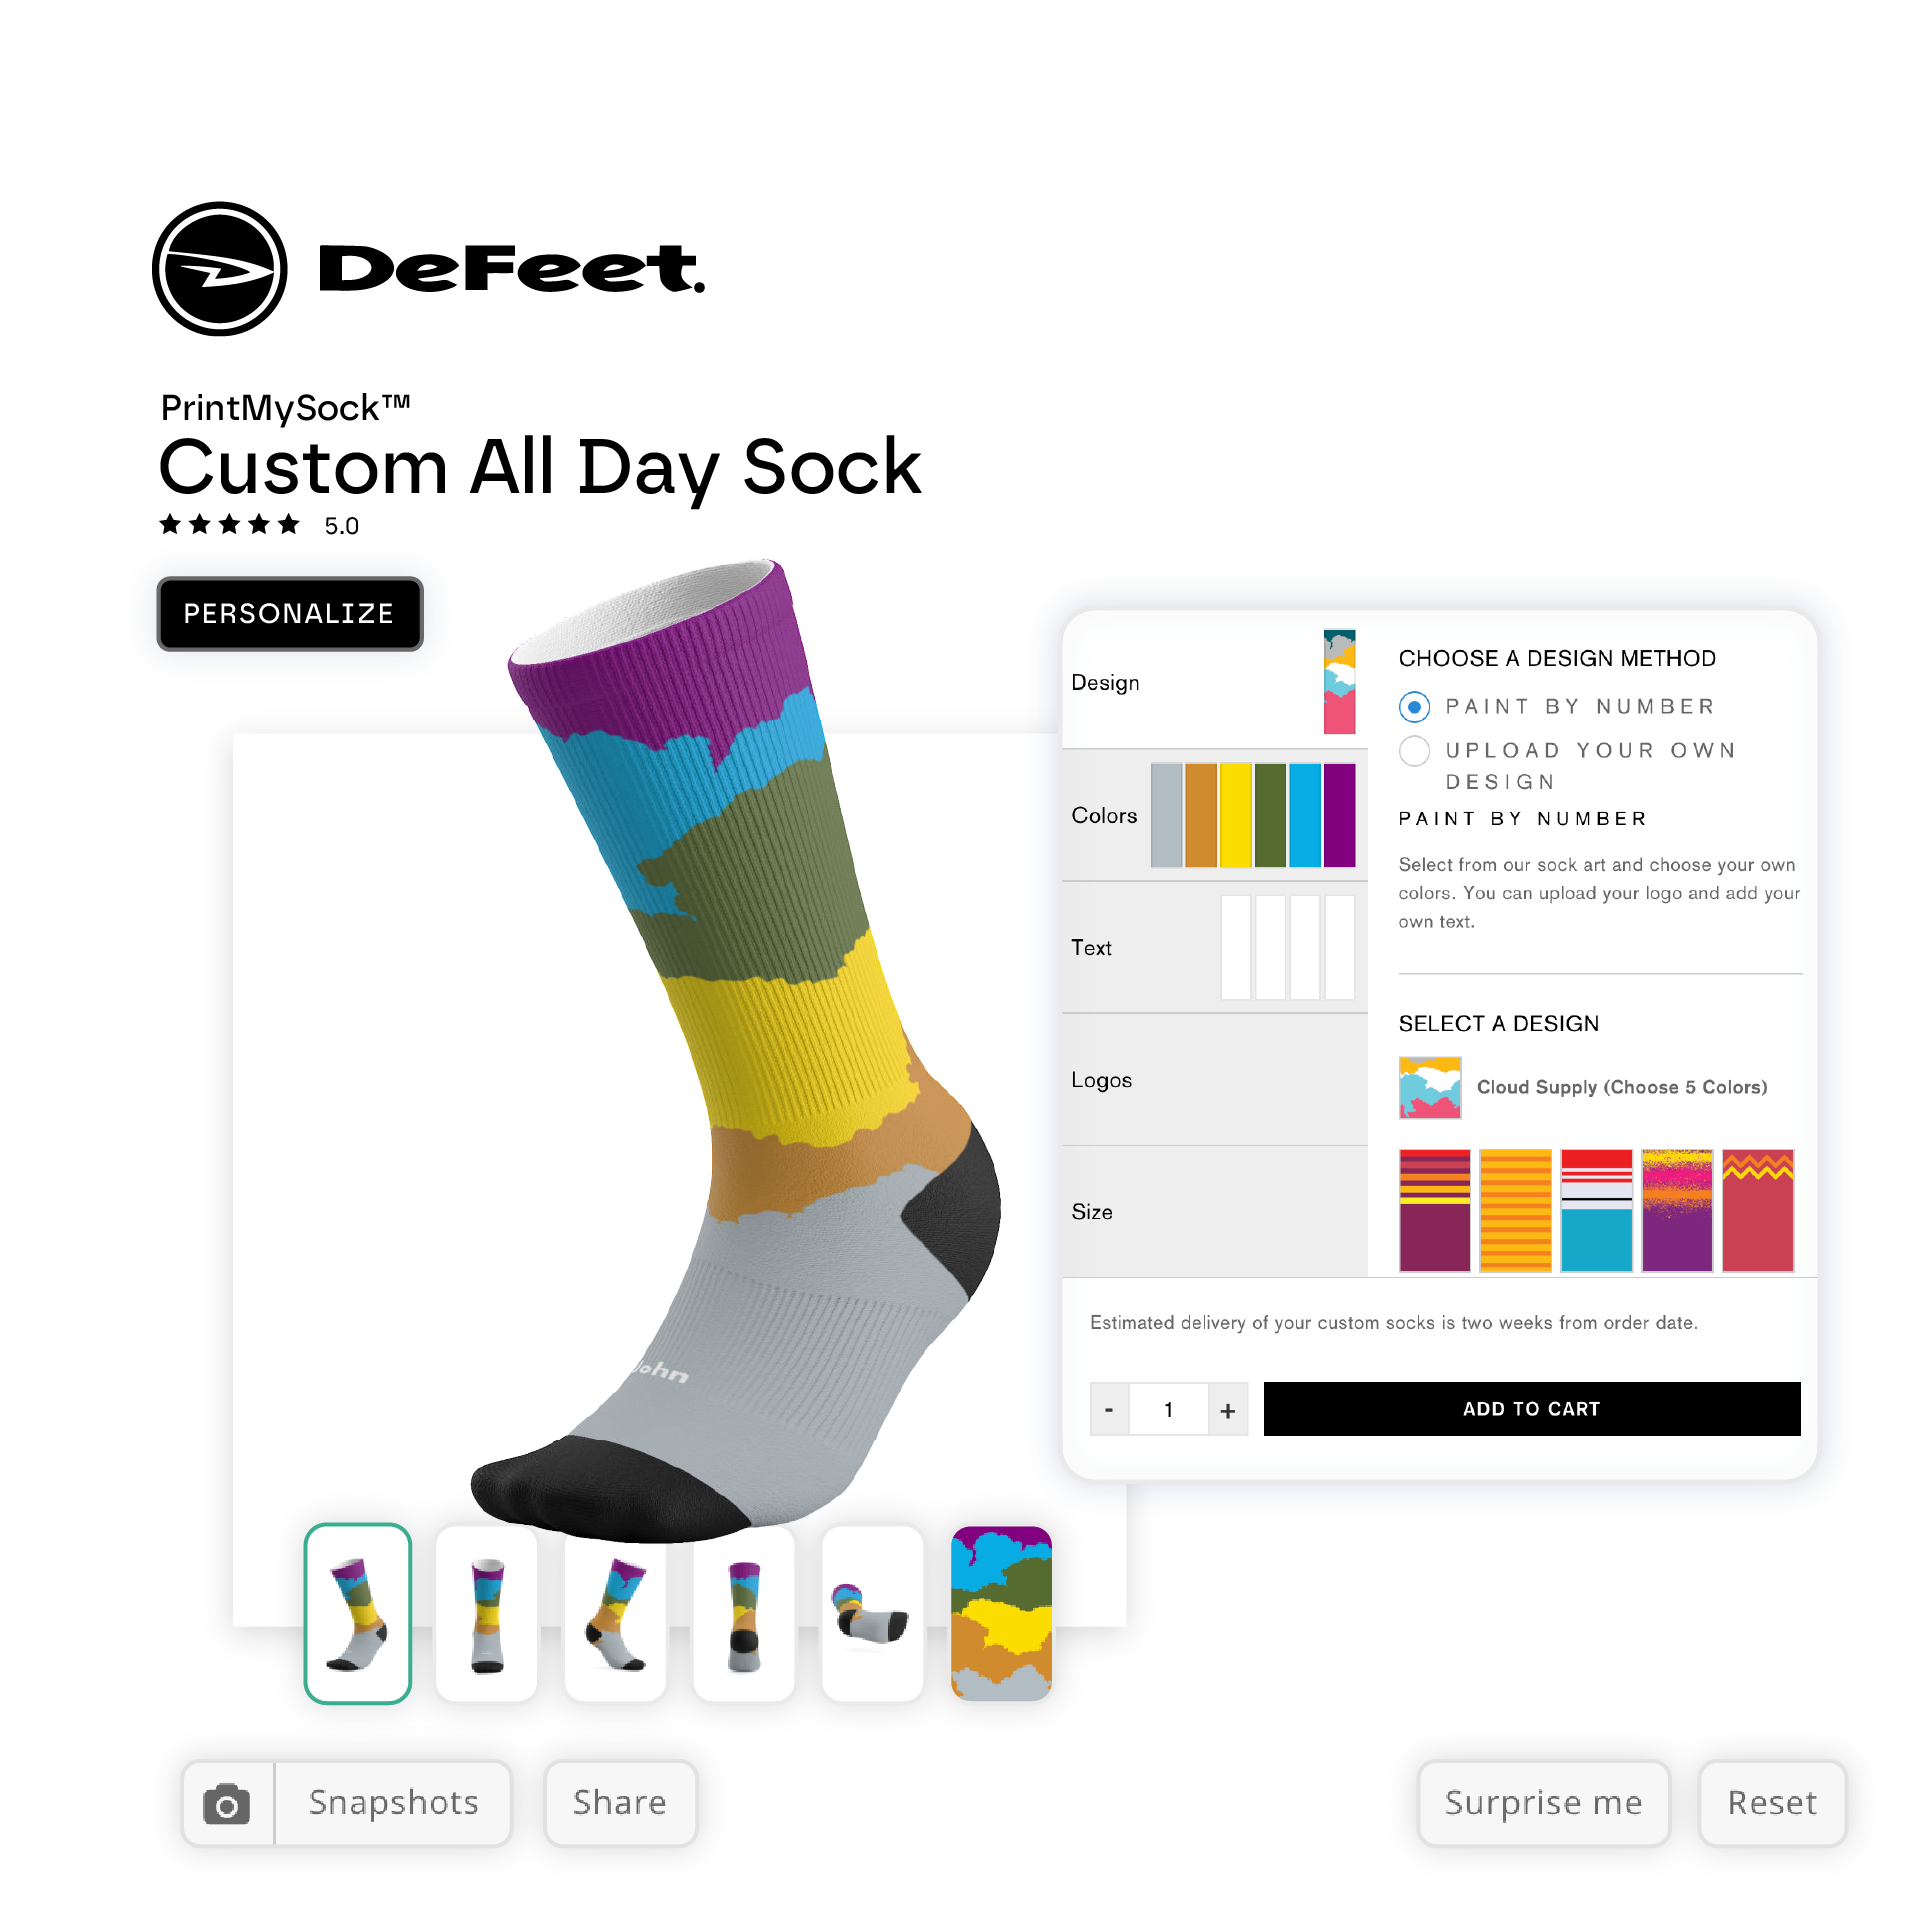 VU Custom - Defeet Personalized Products